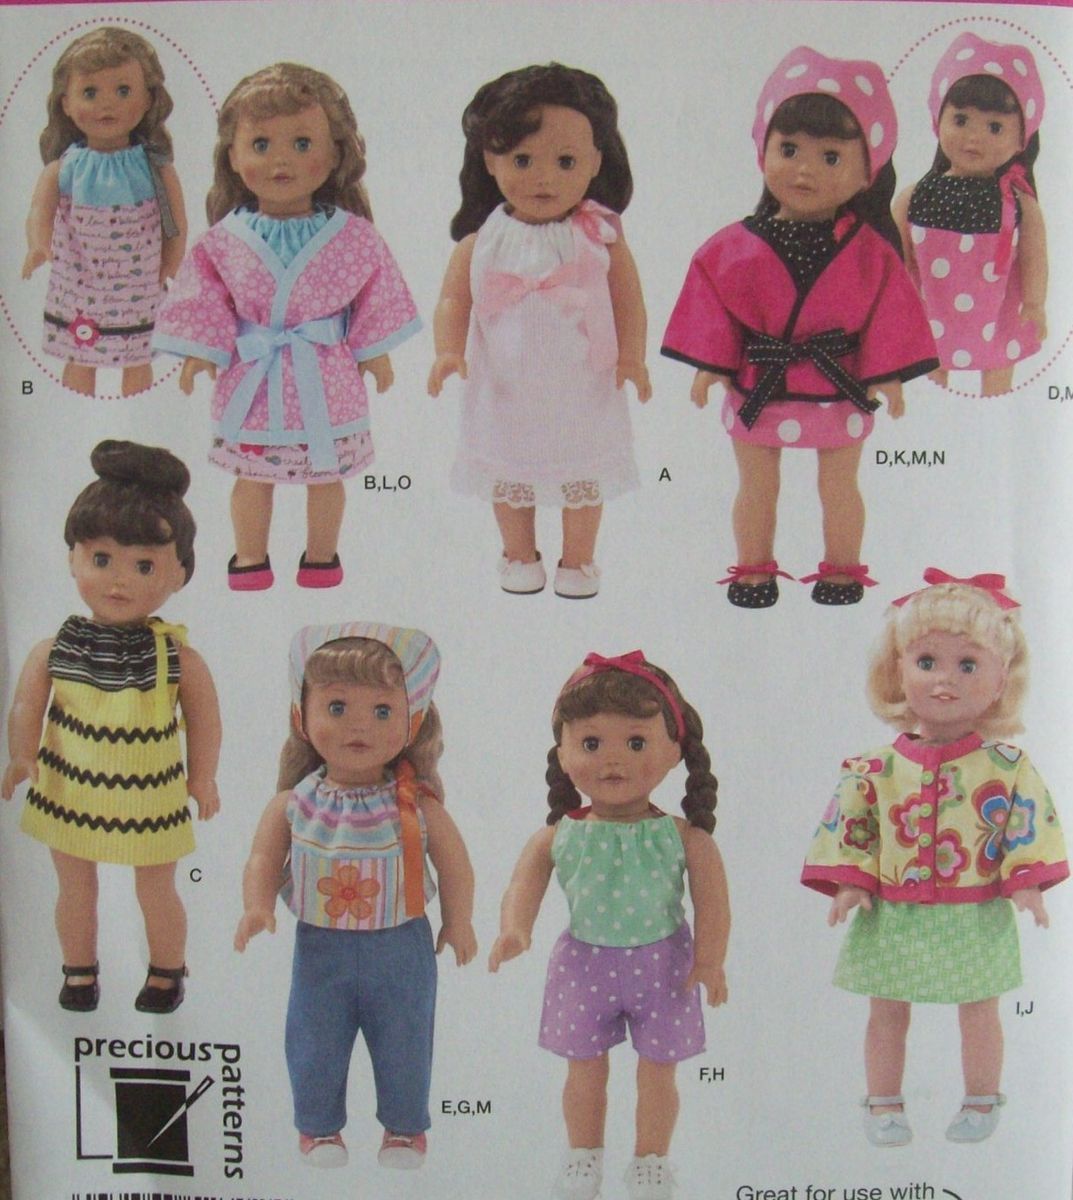   2302 Pattern for 18 Doll Clothes Fits American Girl Dolls Uncut BNIP